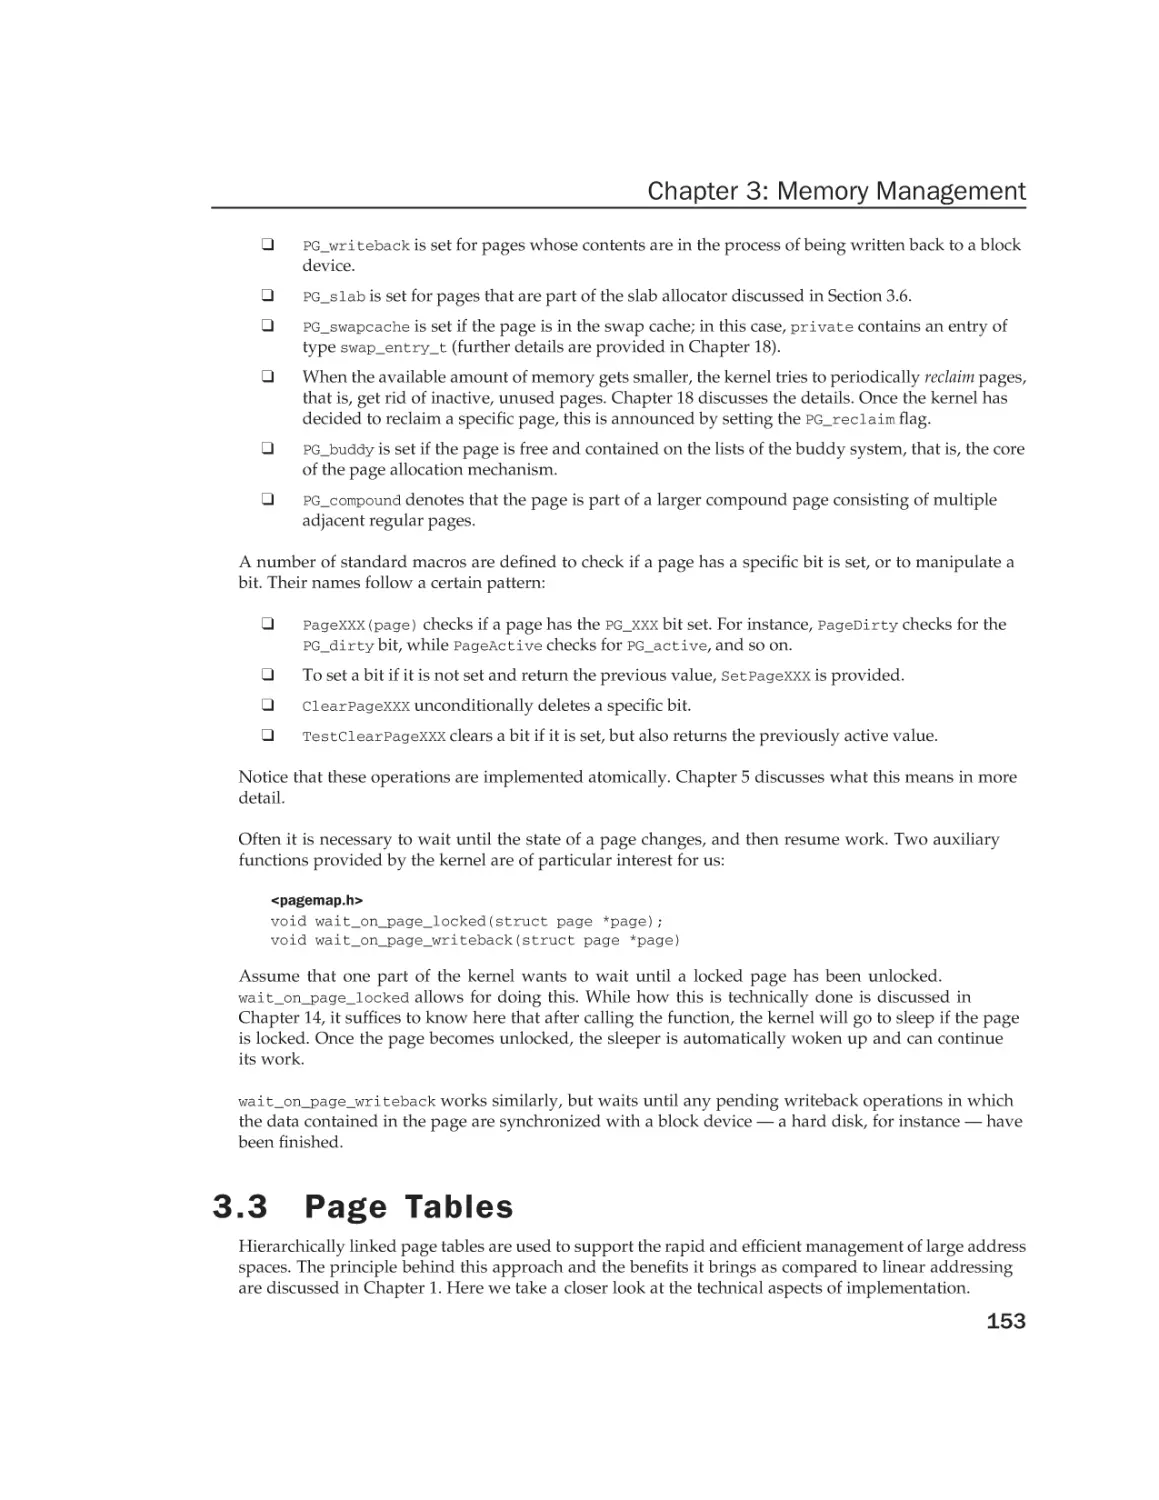 3.3 Page Tables